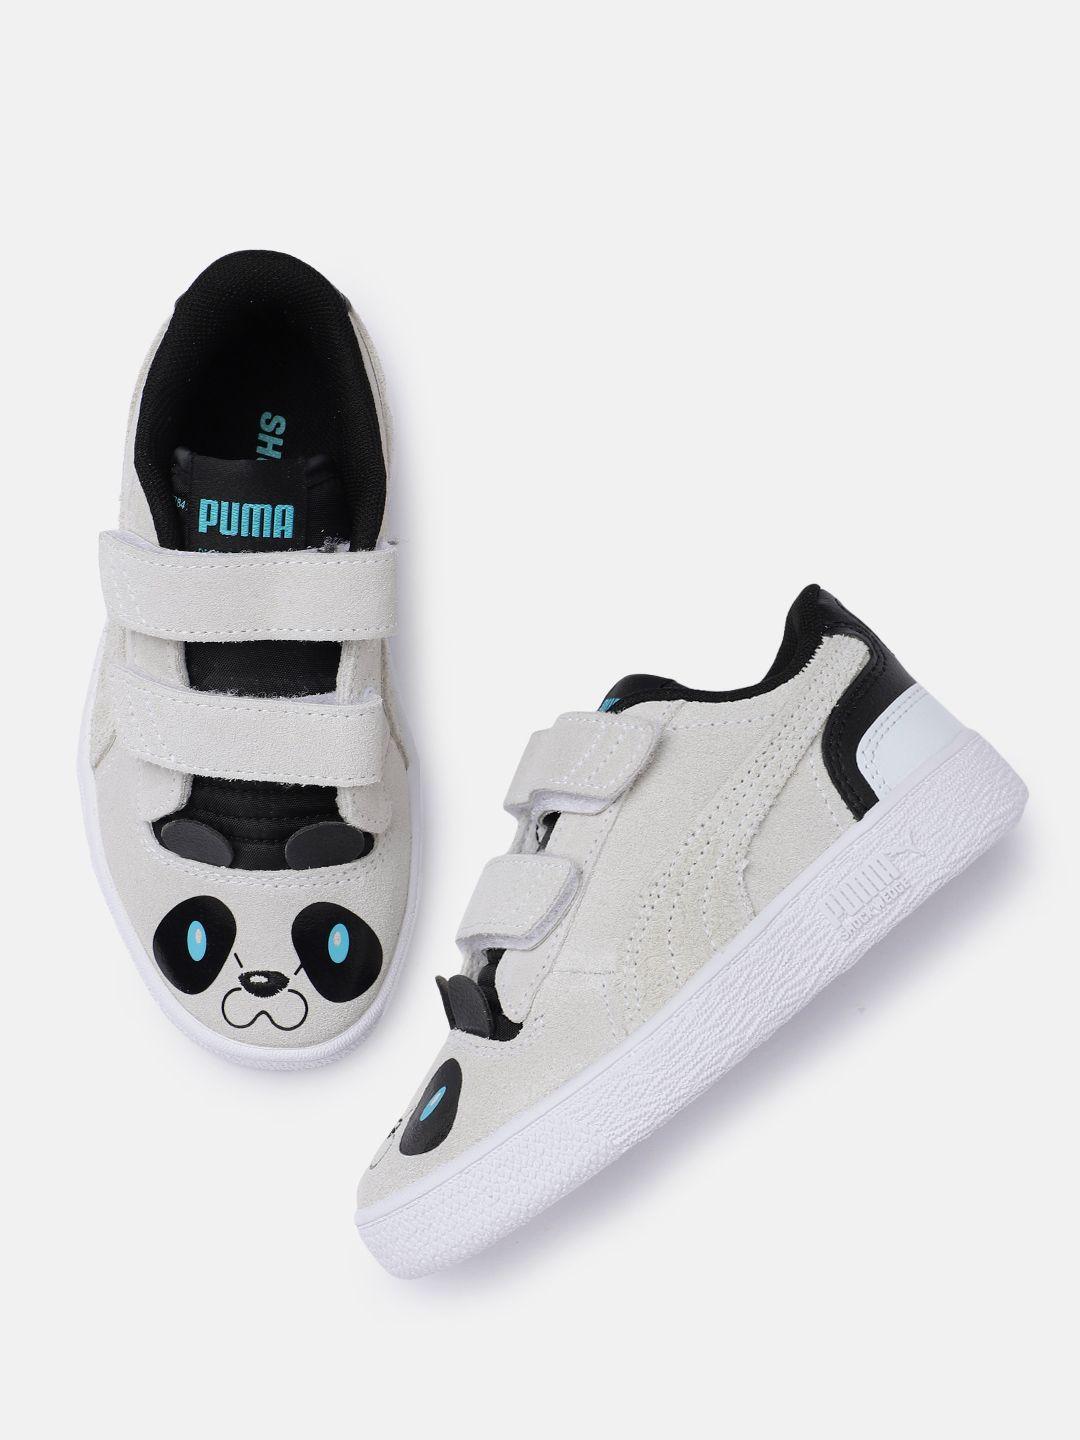 puma-boys-off-white-printed-ralph-suede-sampson-sneakers